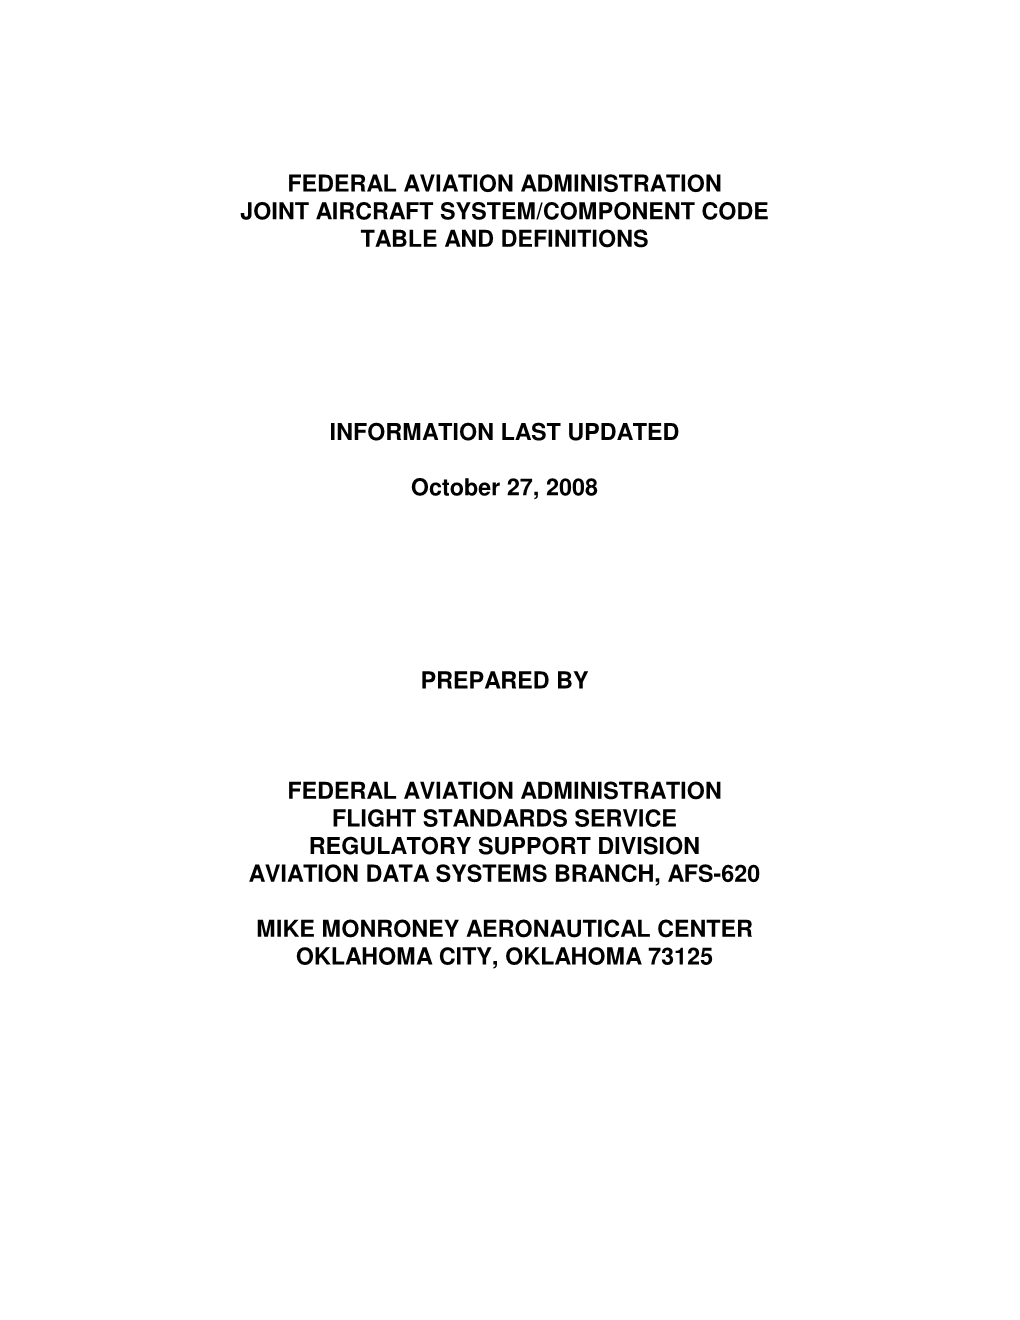 Federal Aviation Administration Joint Aircraft System/Component Code Table and Definitions